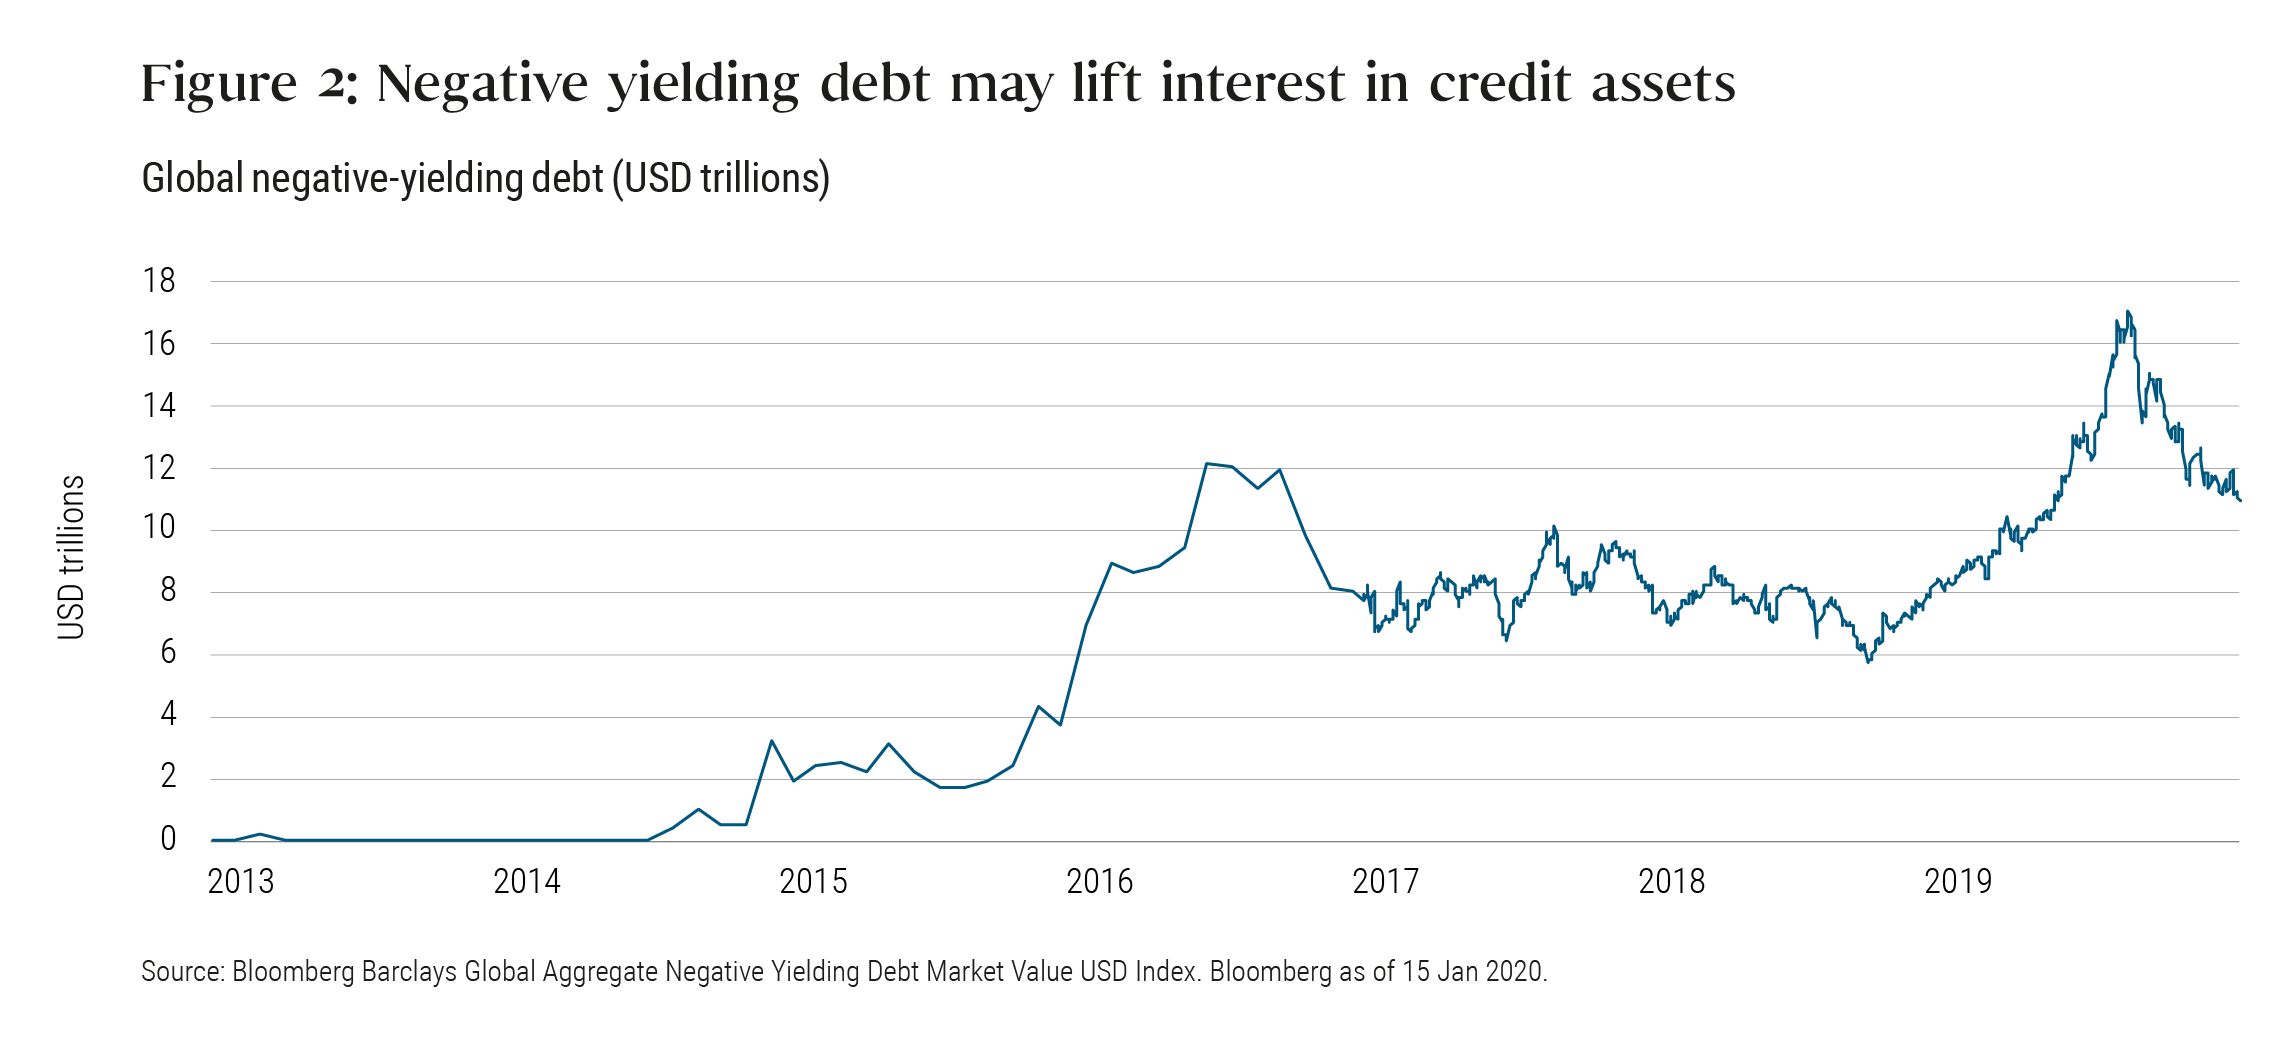 Figure 2 is a graph of the amount of global negative-yielding debt from 2013 to 2020. The line is basically at zero until mid-2014, when it starts to climb. The amount of debt in this category peaked in mid-2019 at around $17 trillion, and fell to about $11 trillion by mid-January 2020. The amount of negative yielding debt fluctuated between $6 trillion and $12 trillion from late 2015 to the first half of 2019, after which it spiked